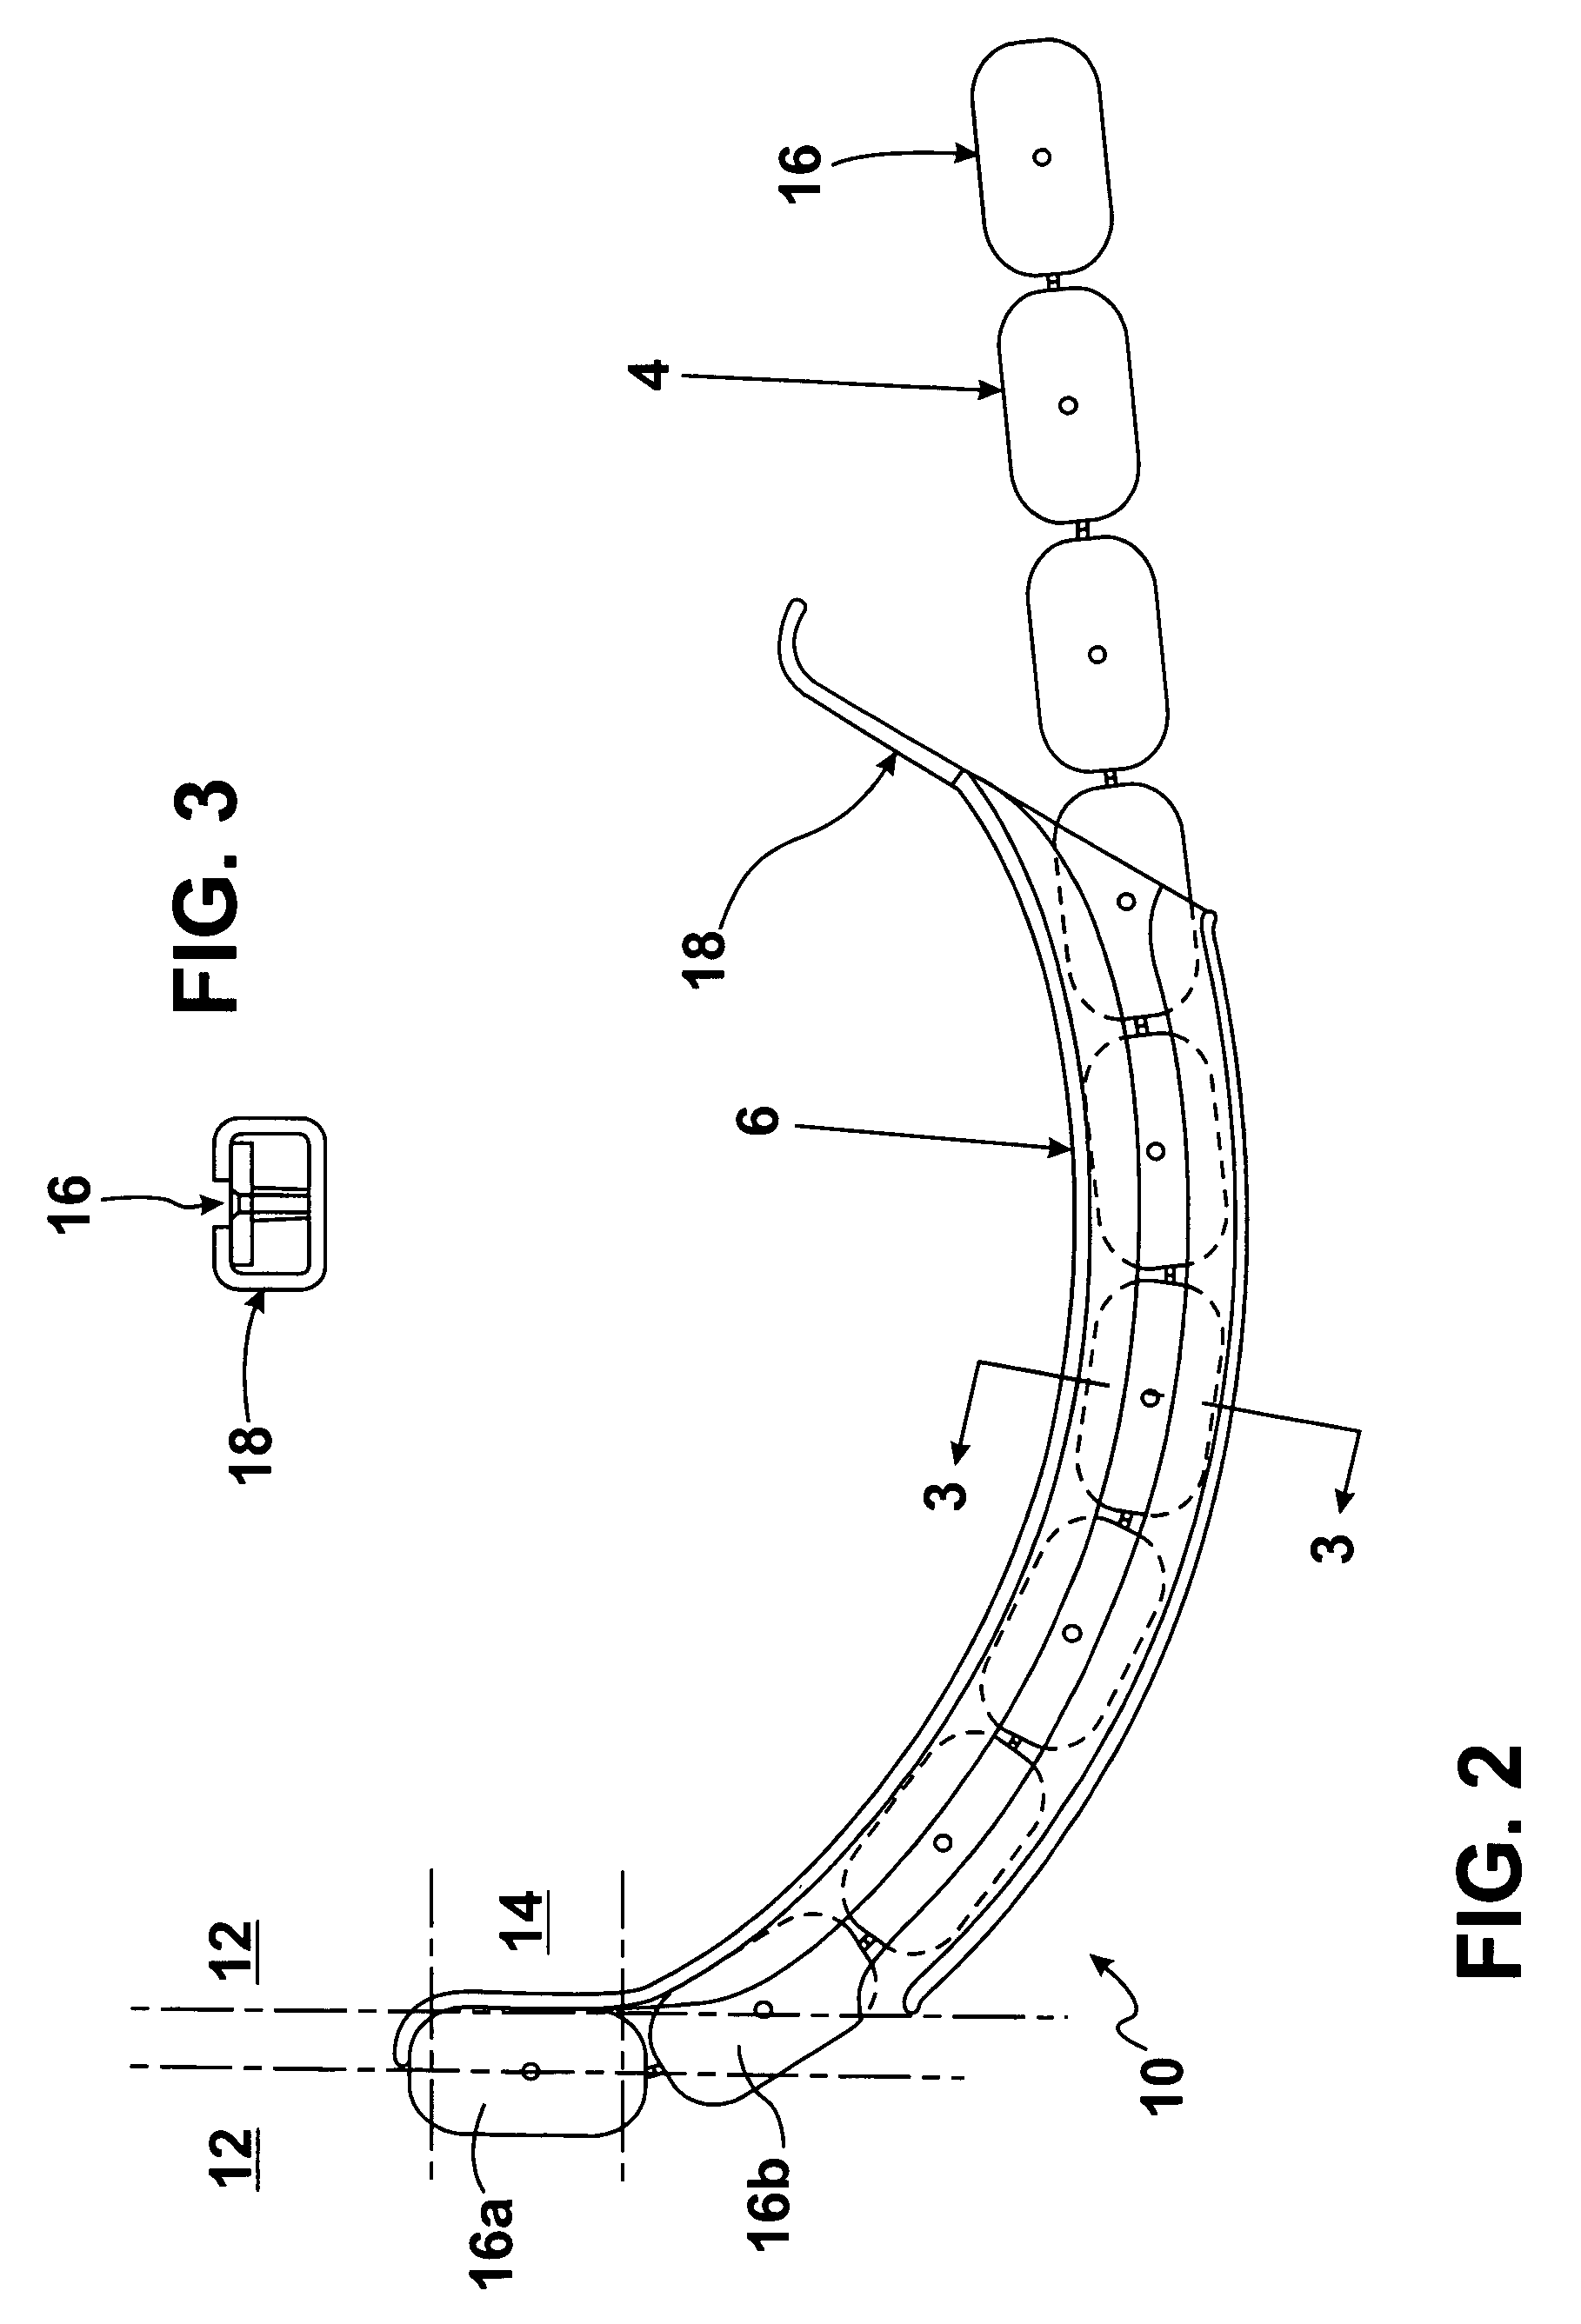 Interconnected and on-site severable deck clips with cooperating installation tool for joining two adjacent decking planks to an underlying support structure